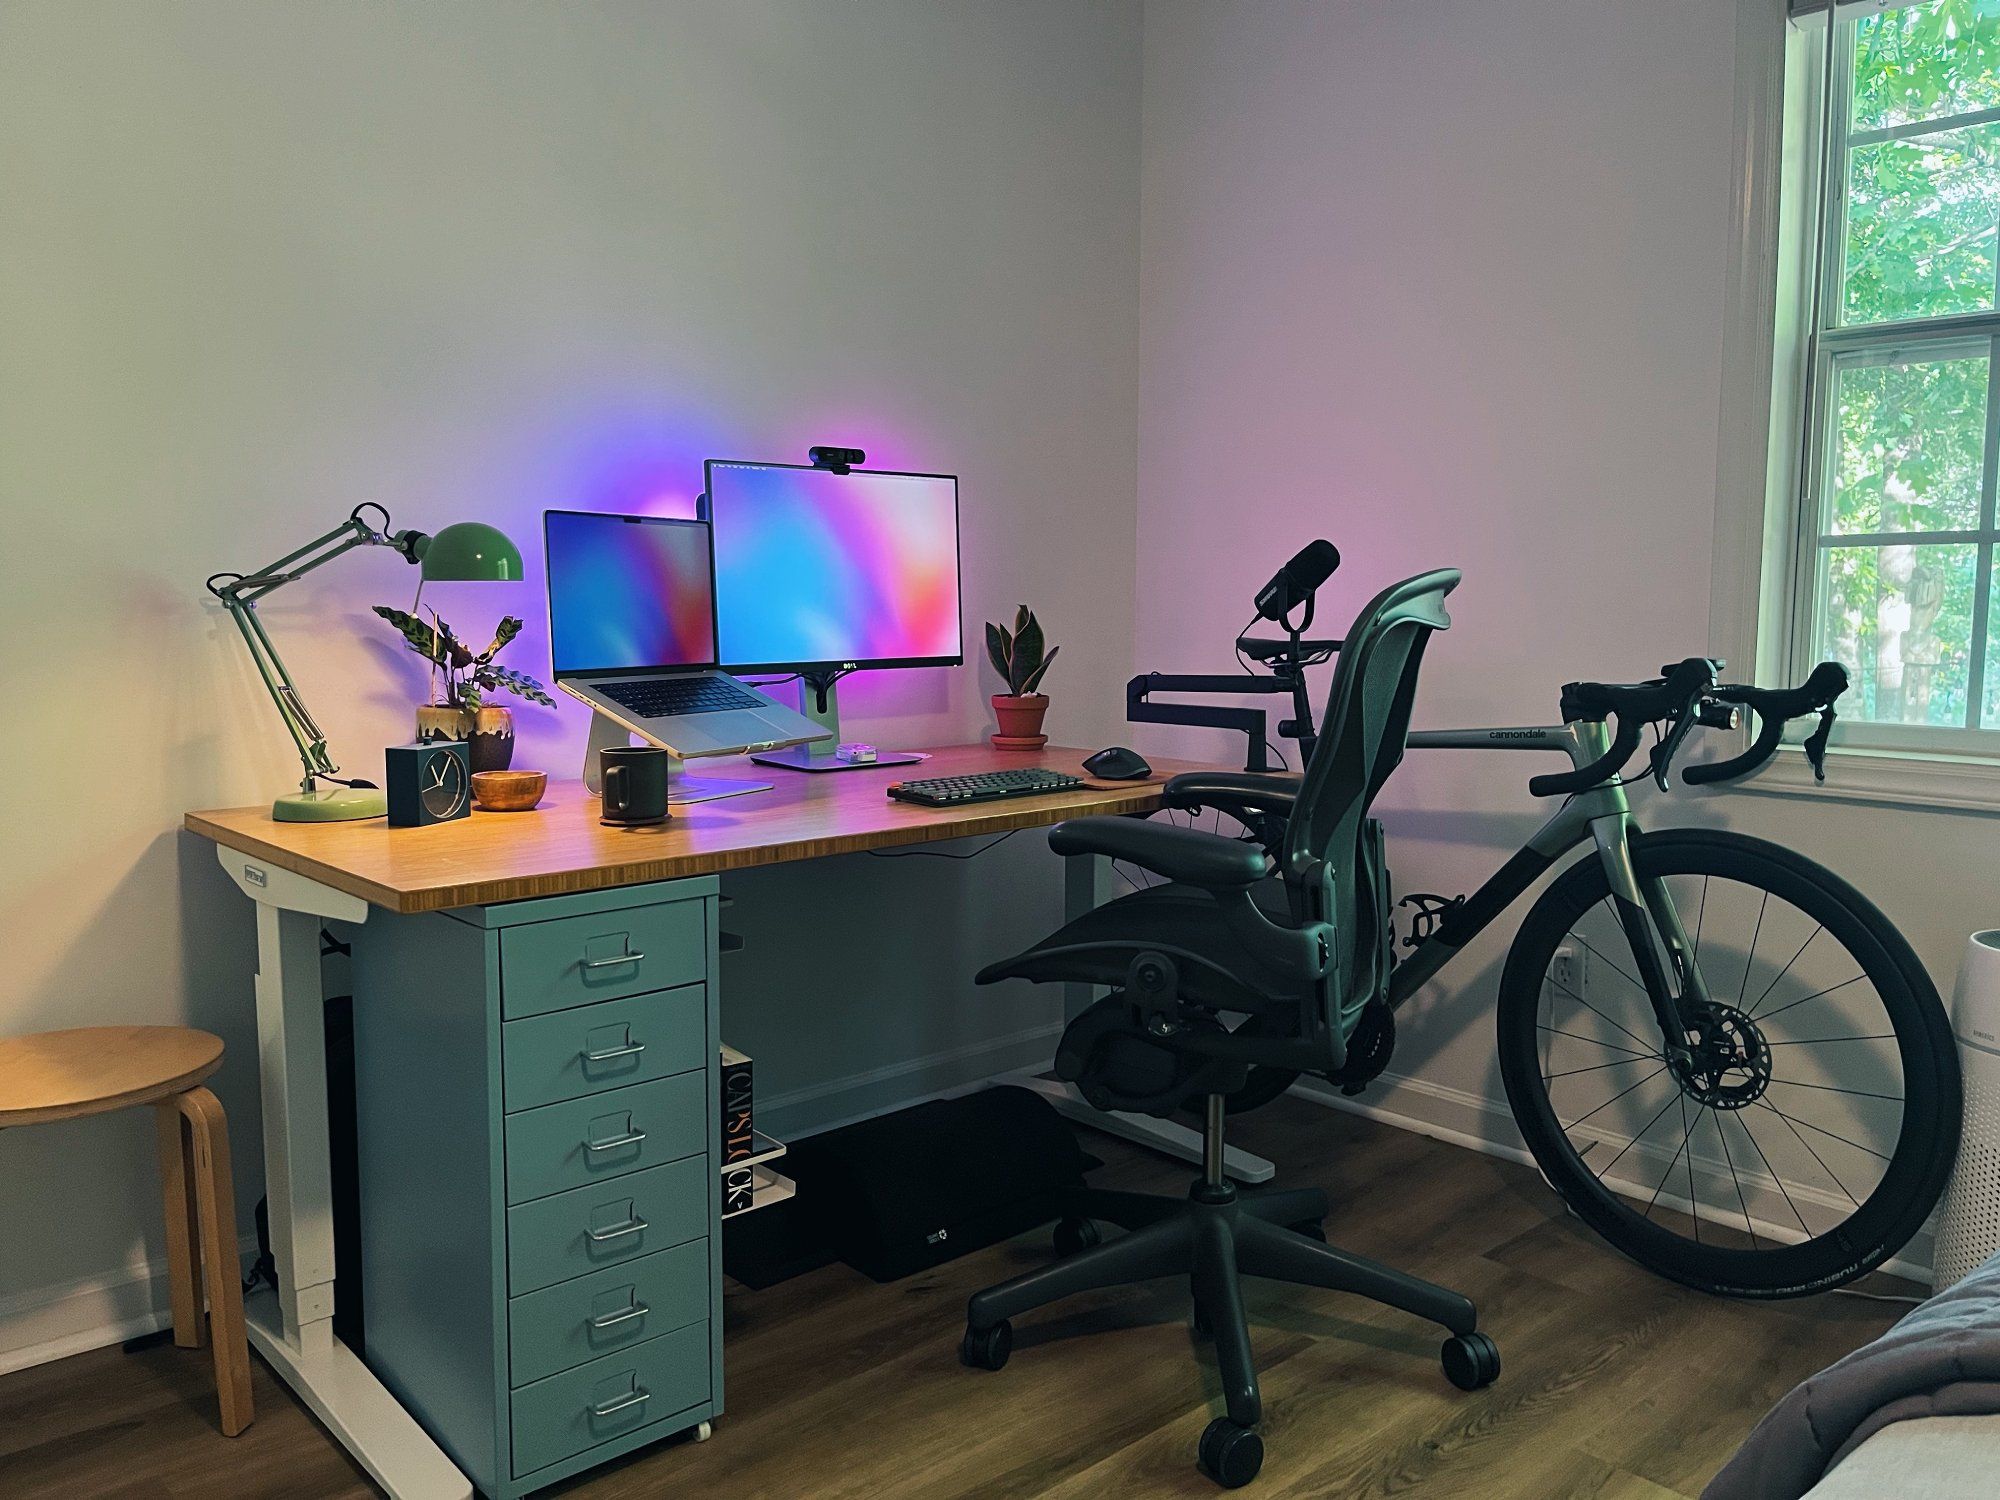 A minimalist and well-organised designer’s home office featuring an Uplift V2 standing desk, a Herman Miller Aeron chair, and a bicycle positioned near the window